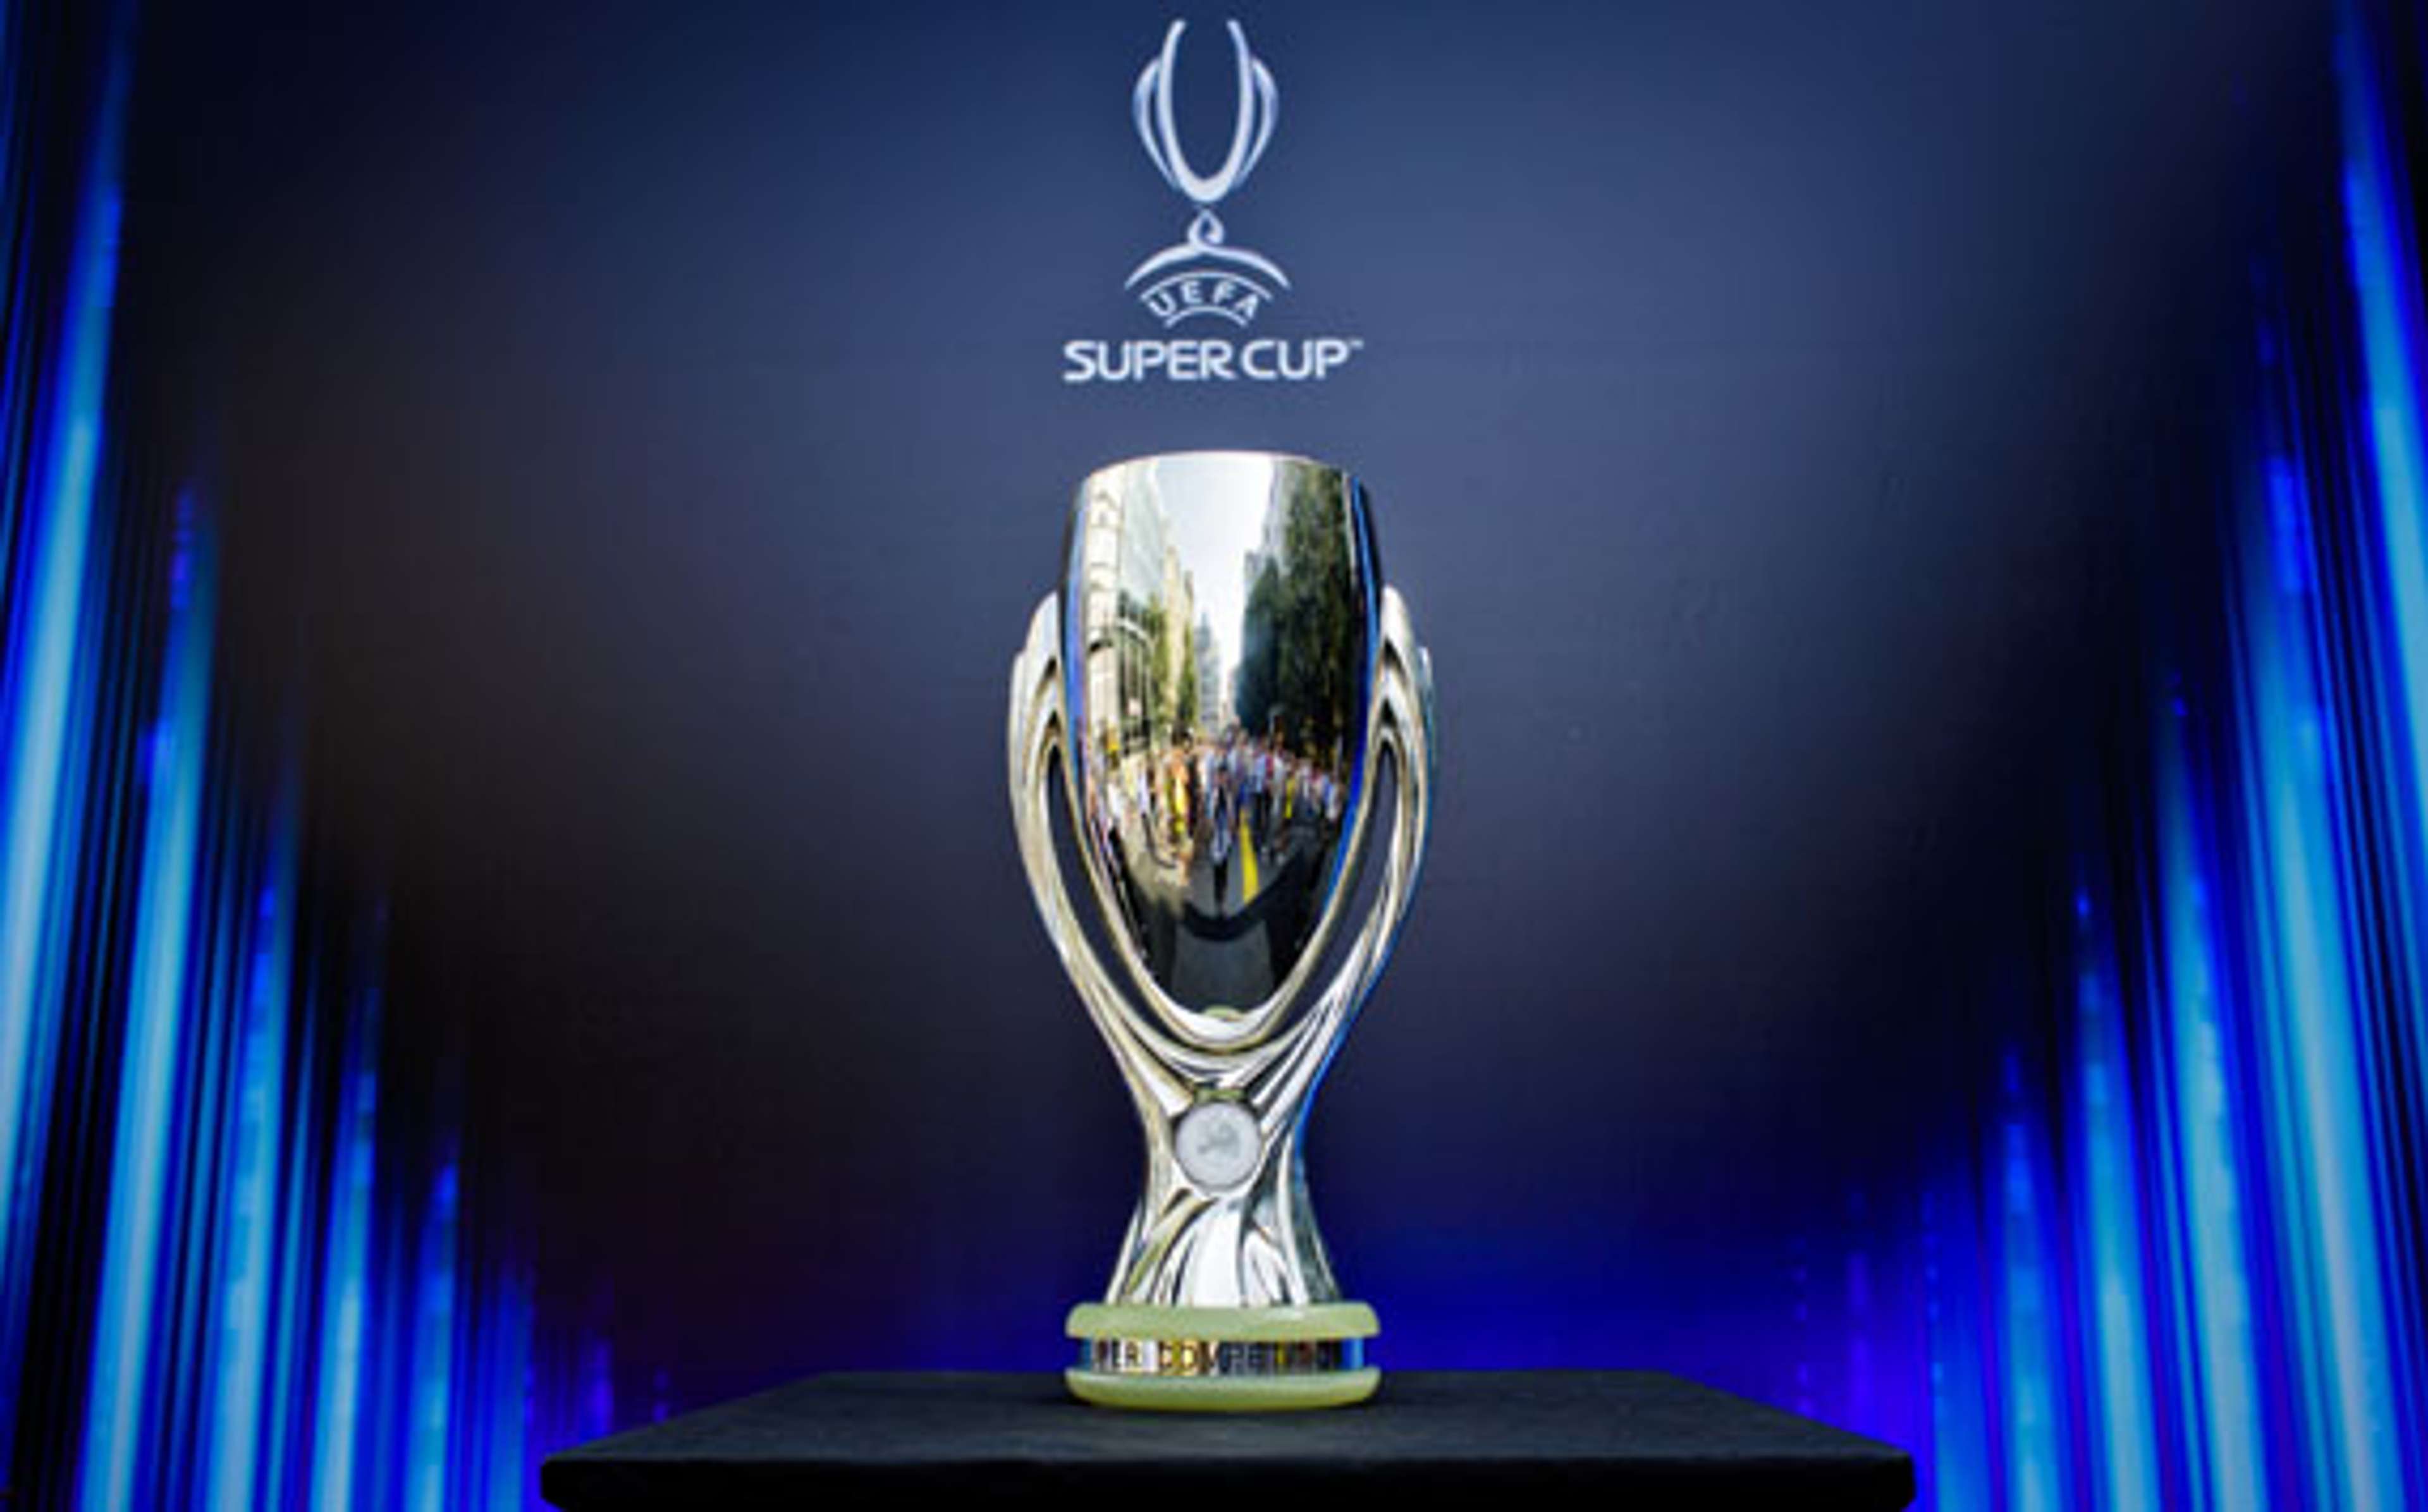 The UEFA Super Cup trophy